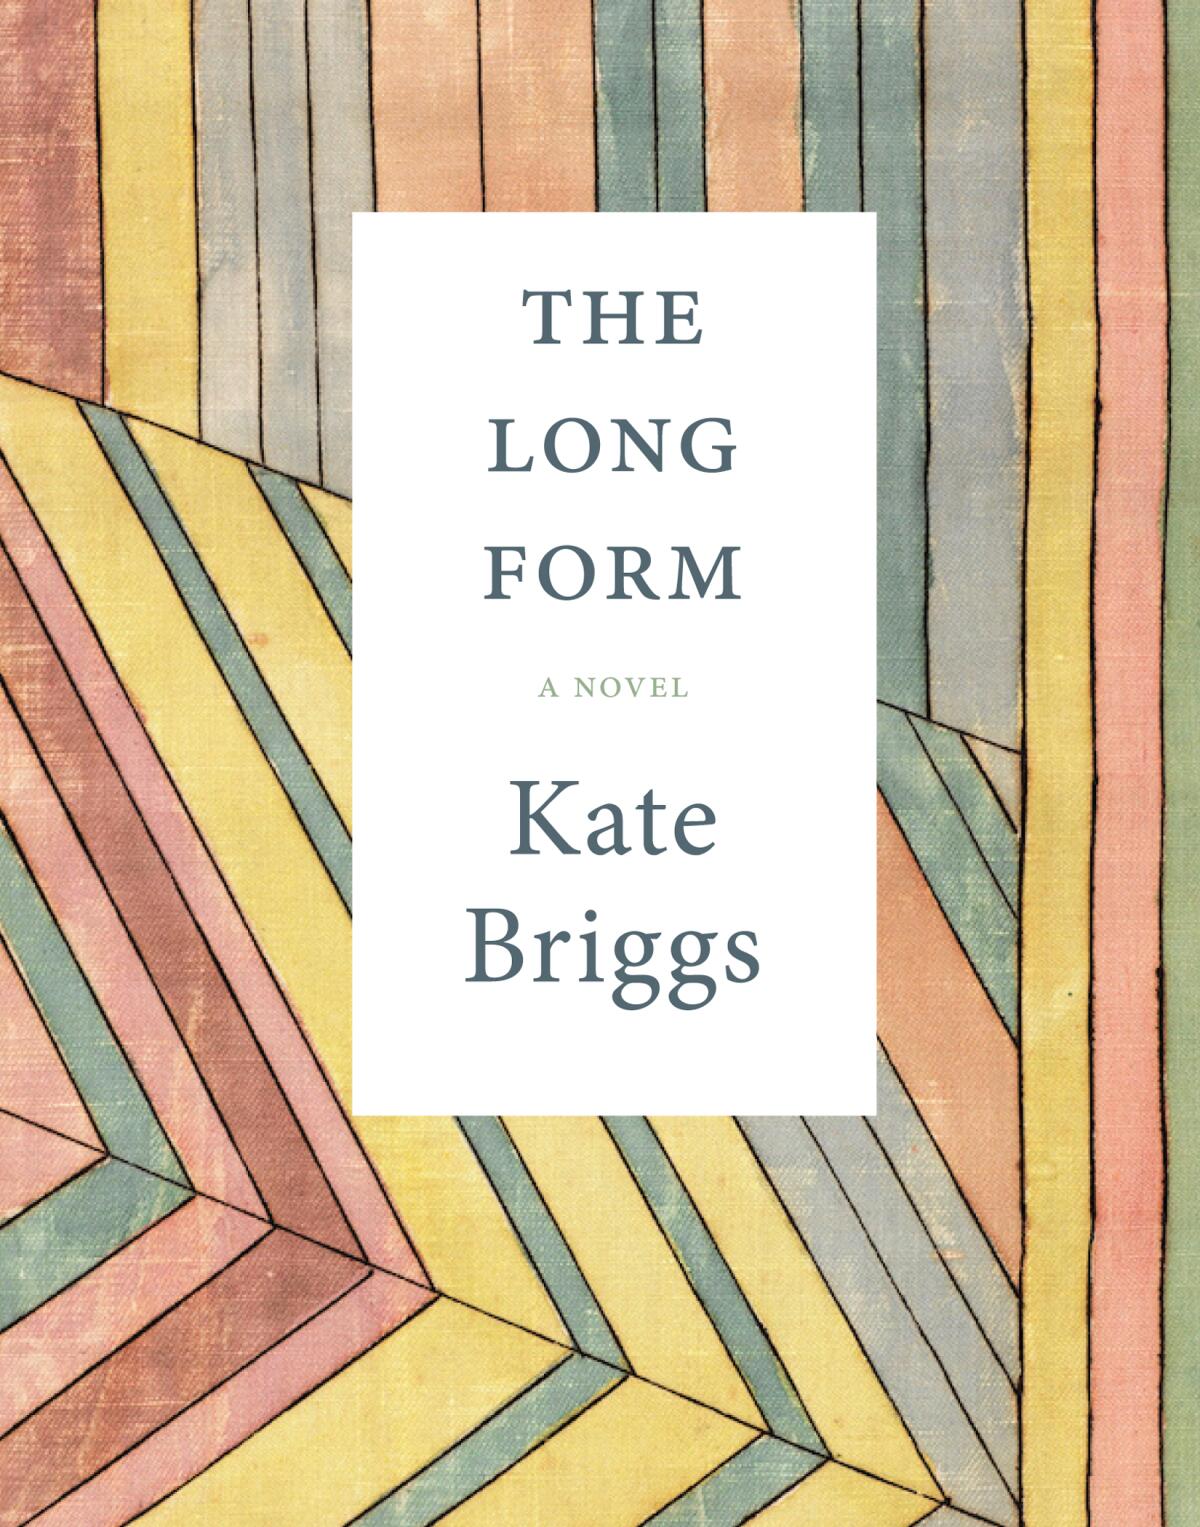 "The Long Form," by Kate Briggs